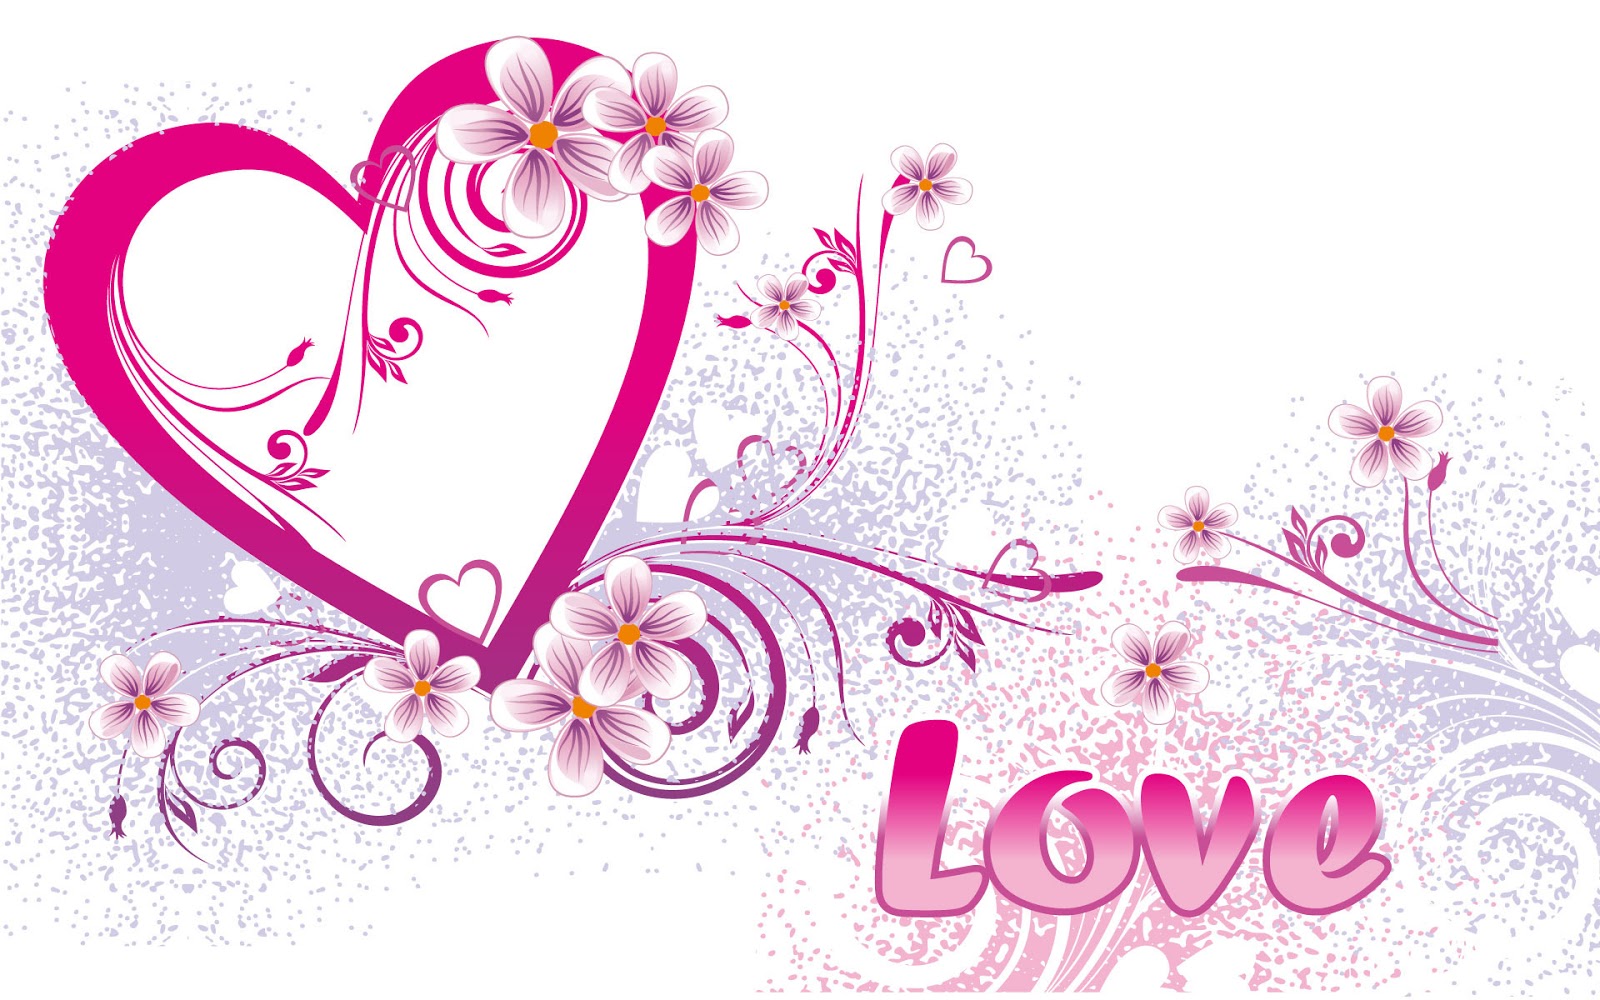 3. I Love You 2 Hd Wallpapers And Pictures For Valentines Day 2014